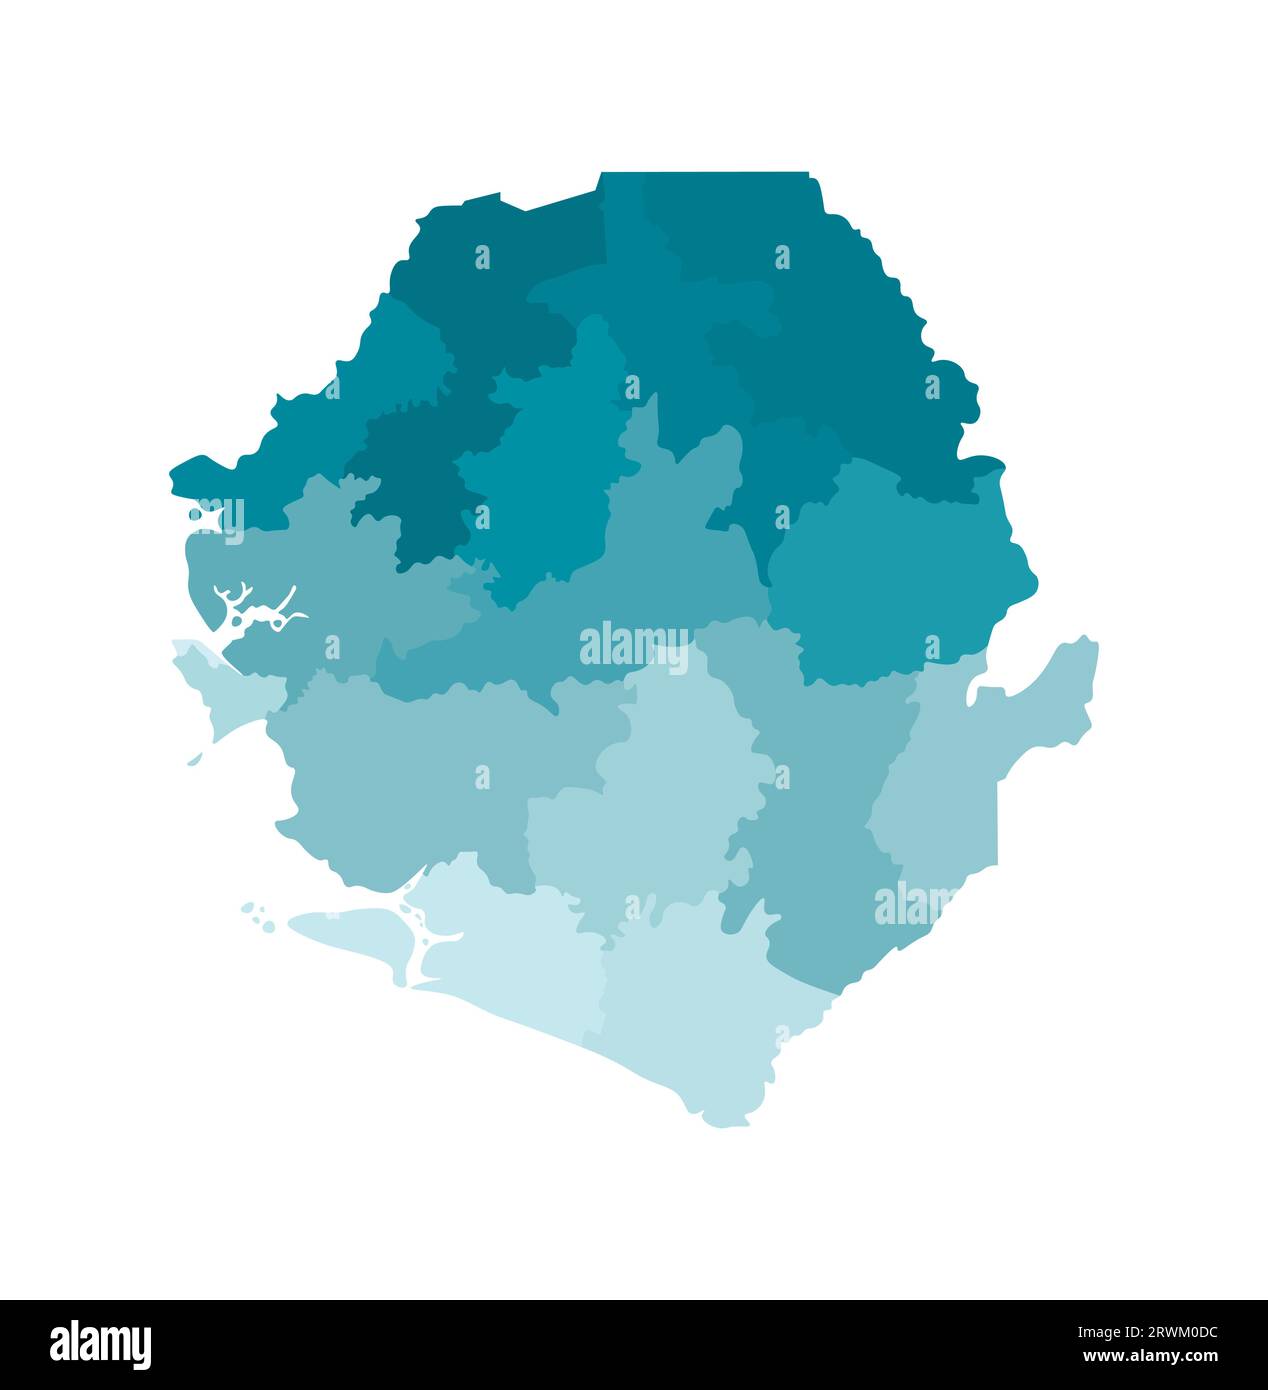 Vector isolated illustration of simplified administrative map of Sierra Leone. Borders of the districts (regions). Colorful blue khaki silhouettes. Stock Vector